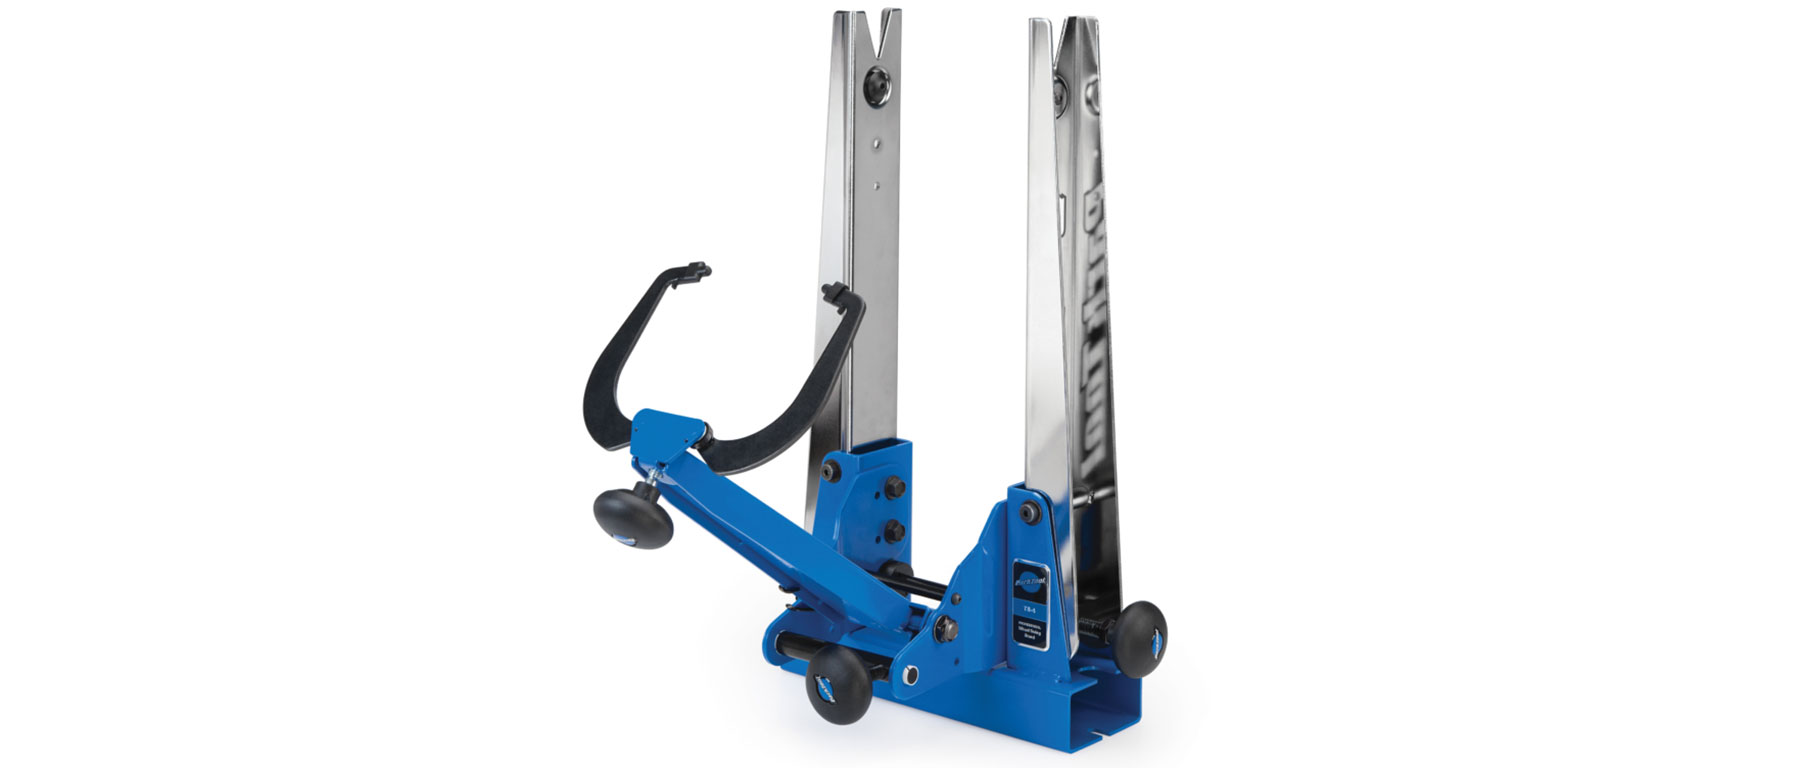 Park Tool TS-4.2 Professional Truing Stand